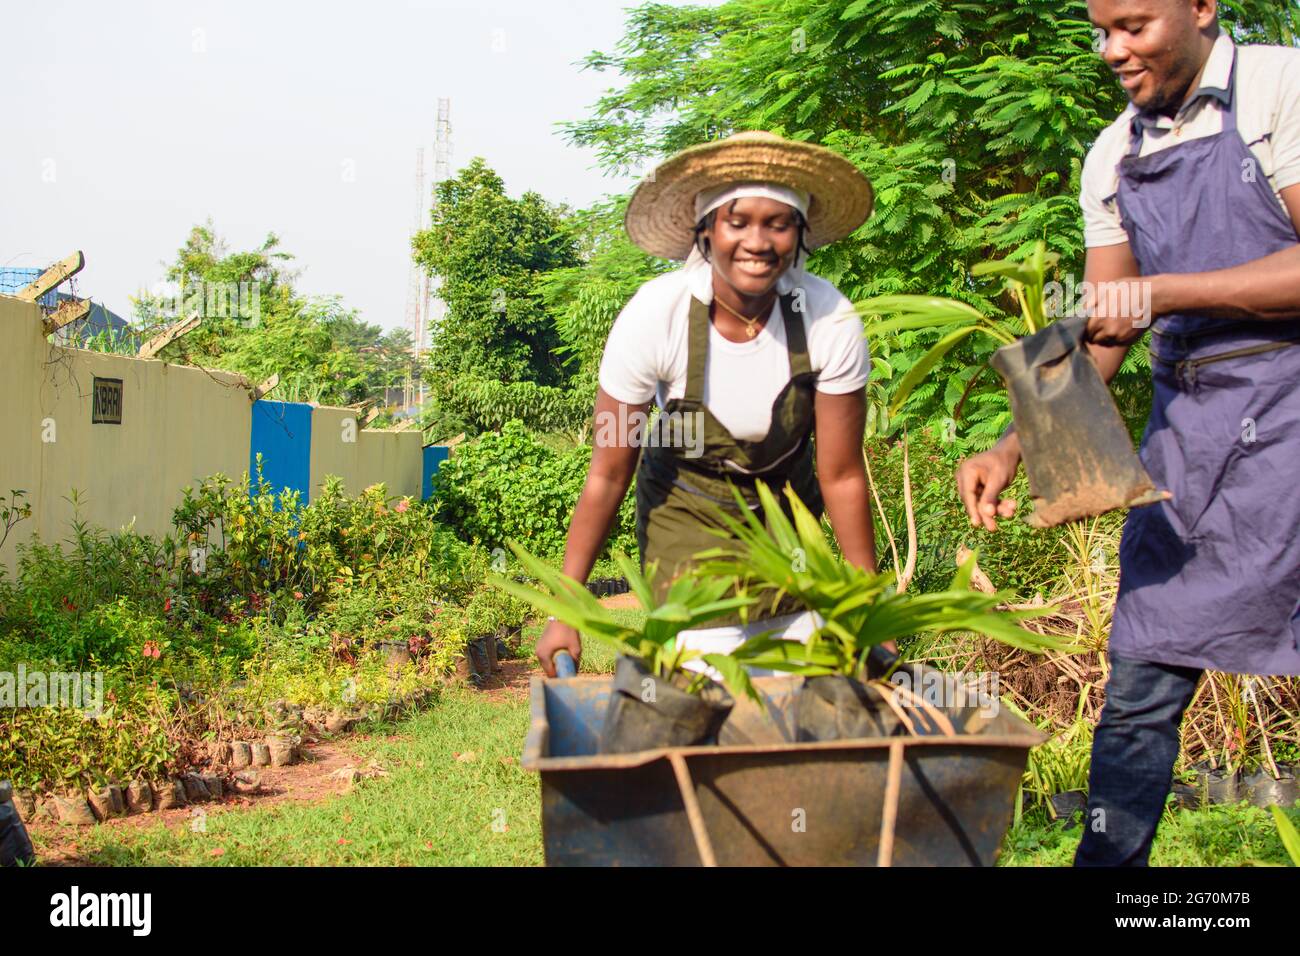 African female and male gardener, florist or horticulturists wearing apron and working together in a garden filled with variety of colorful flowers an Stock Photo